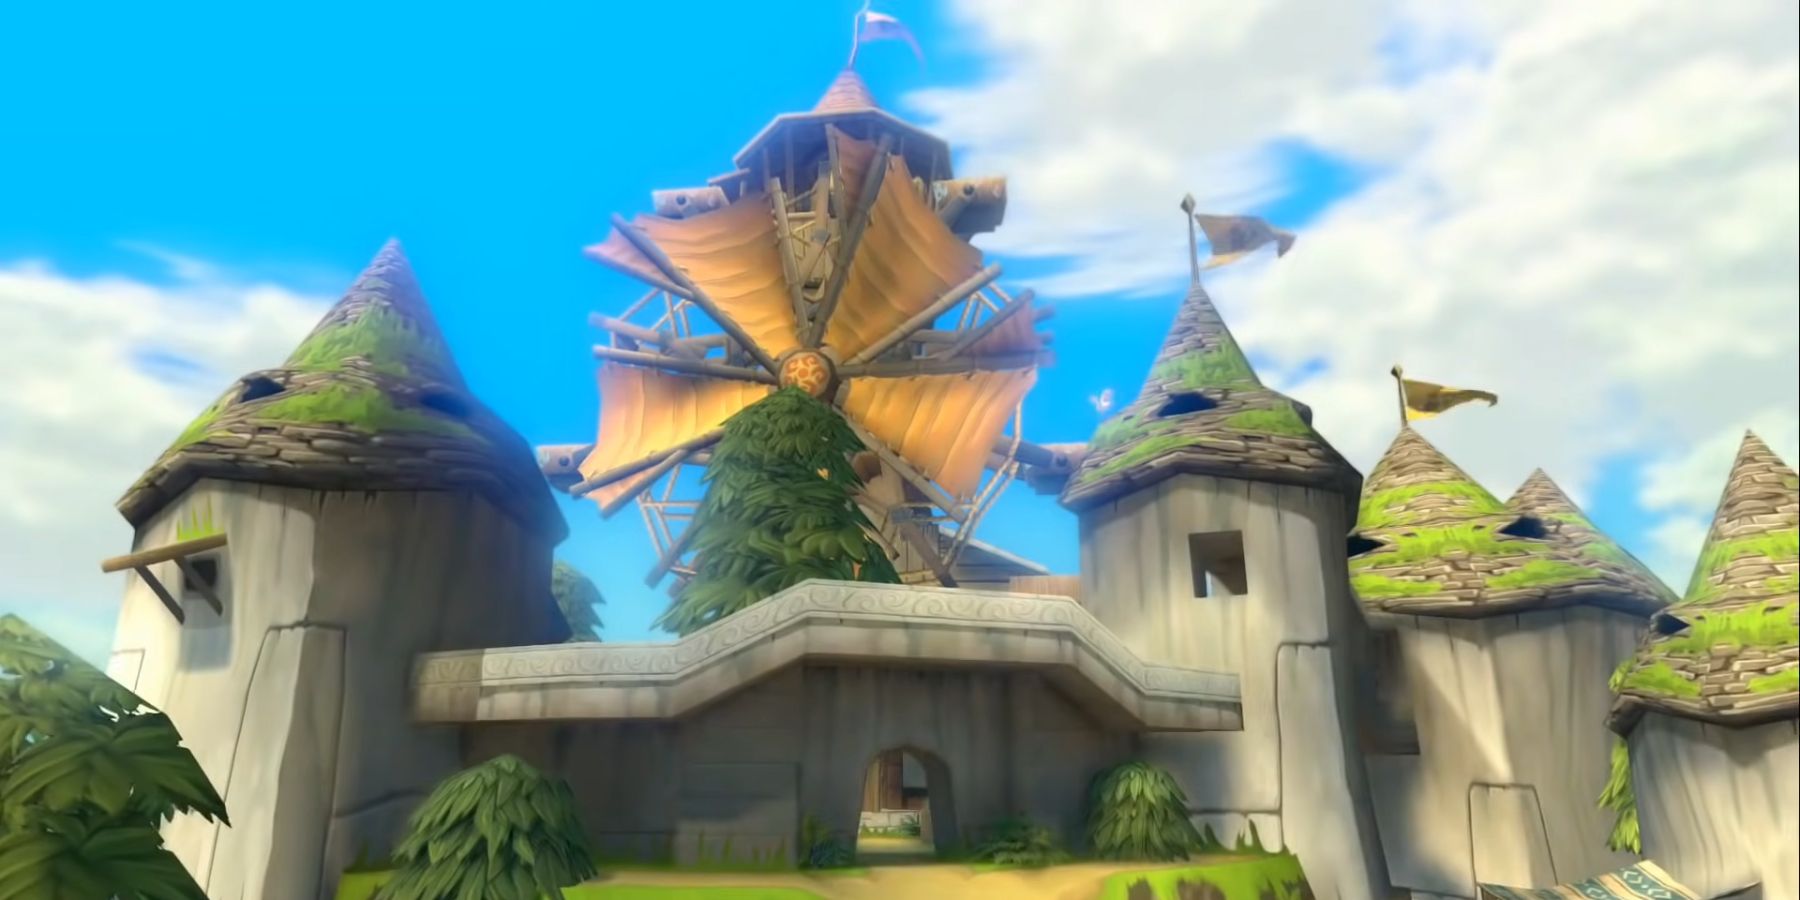 Windfall is one of Wind Waker's major islands, and its name references the opportunity for affluence.